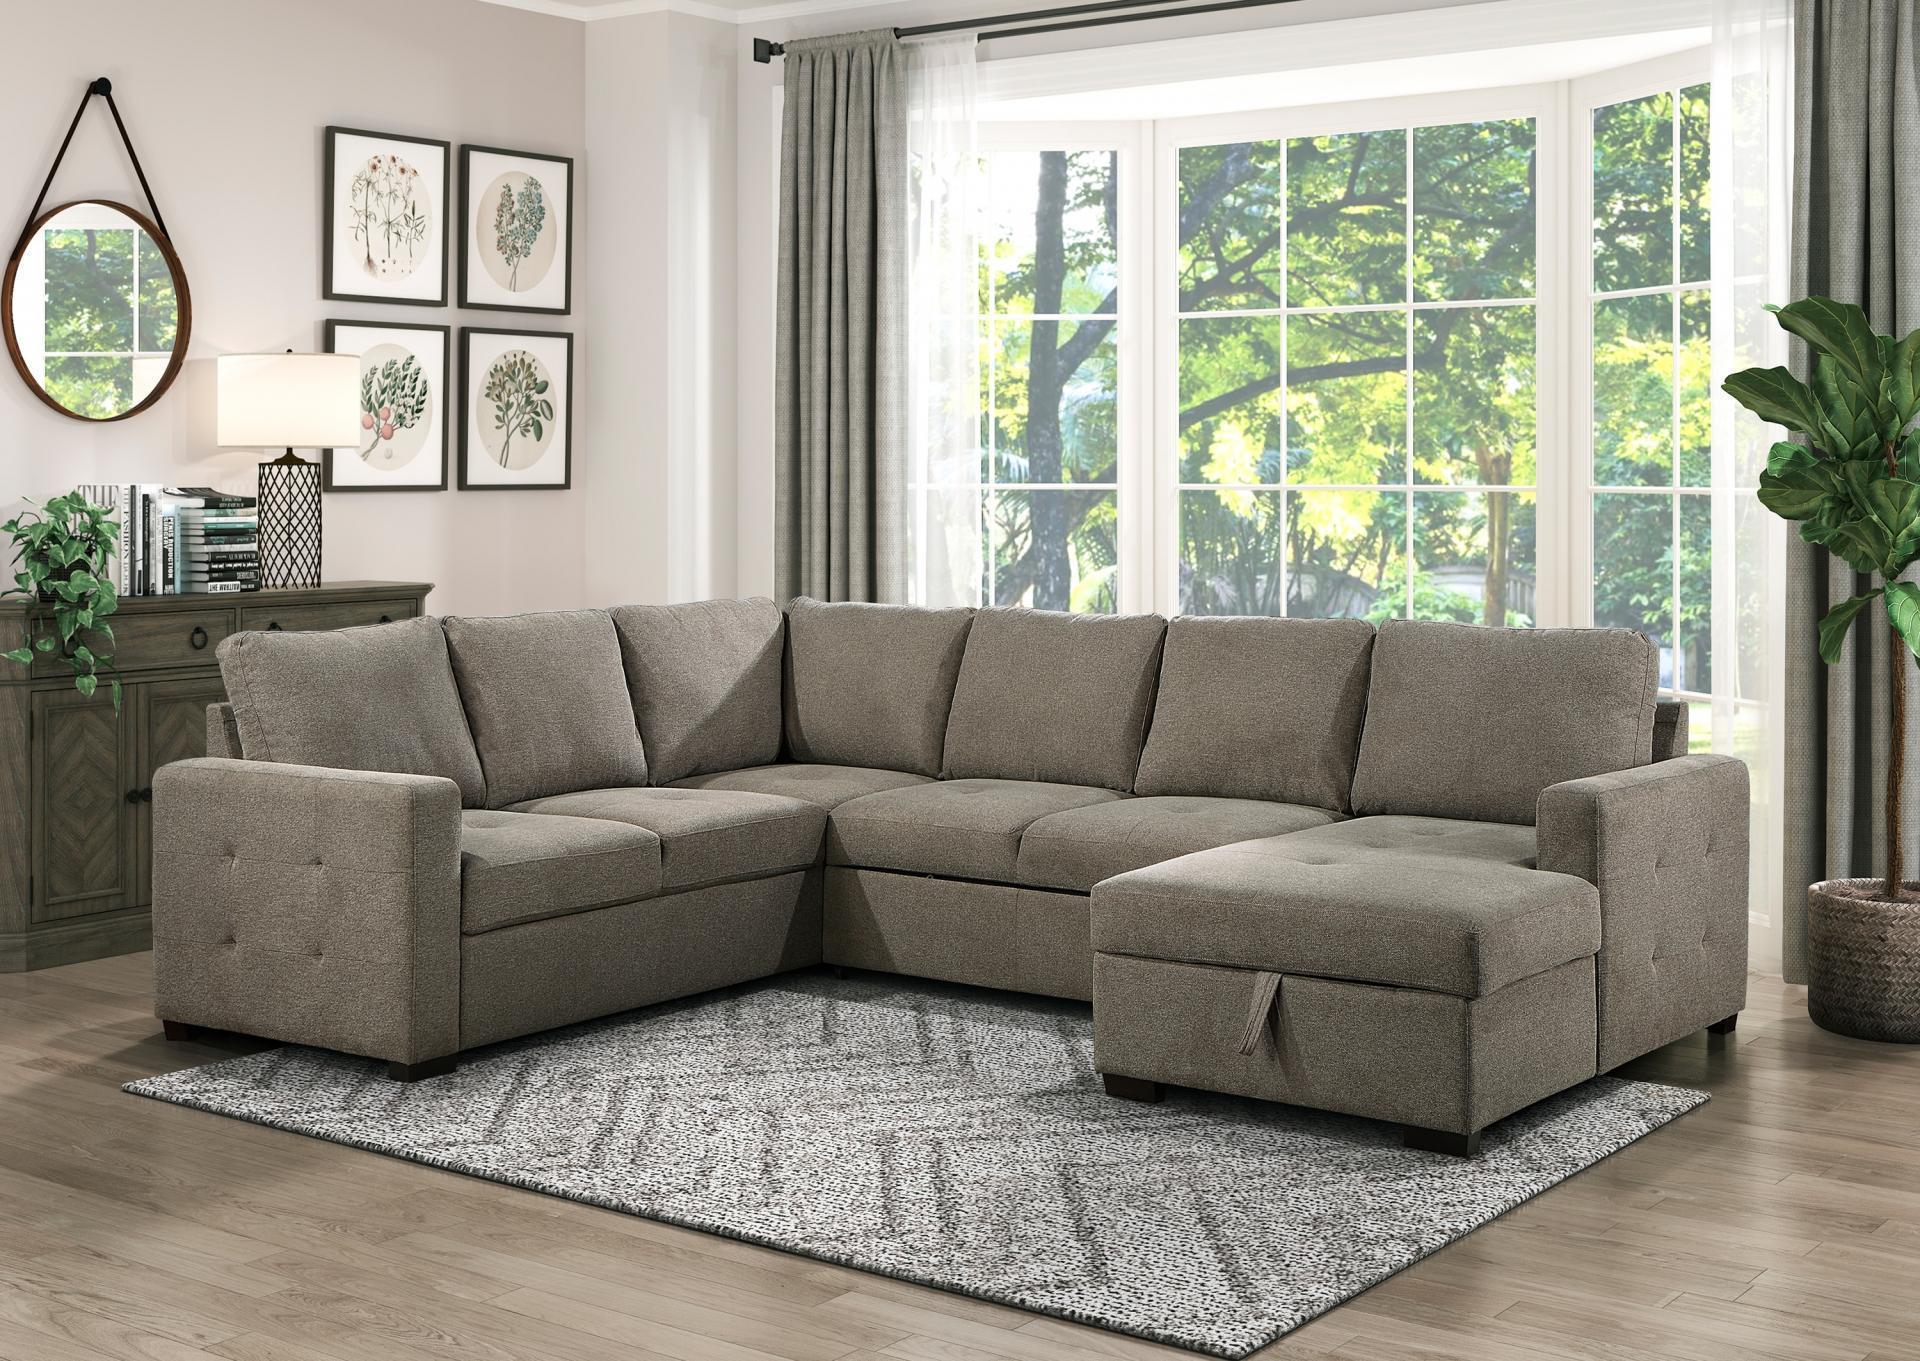 Elton 3pc Pop-Up Sleeper Sectional with Storage,Homelegance